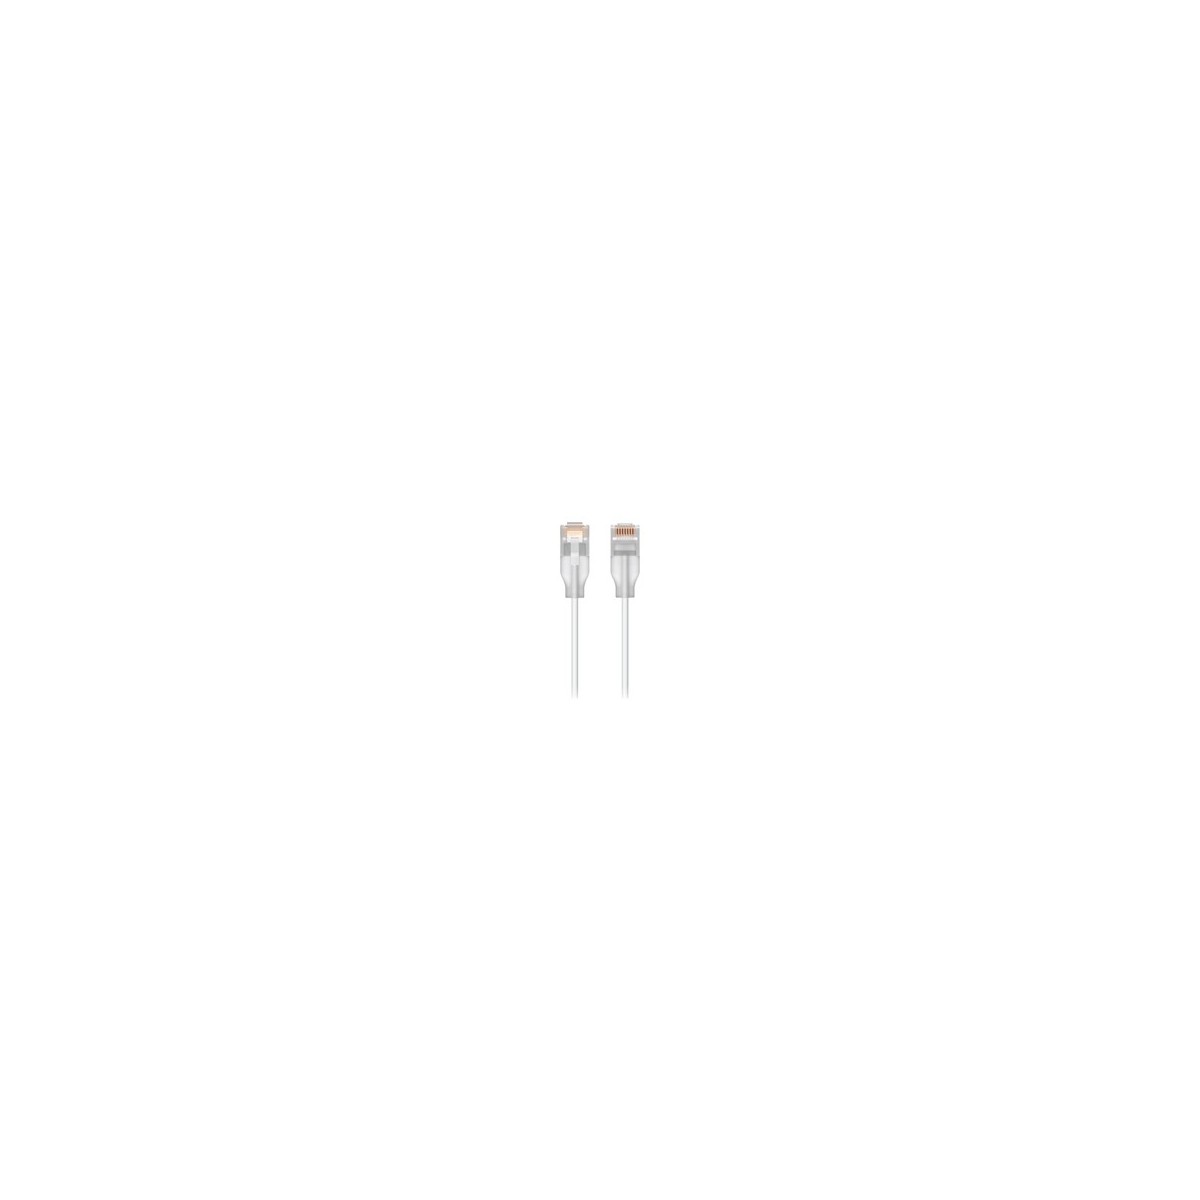 UbiQuiti Nano-thin patch cable with a translucent boot designed to